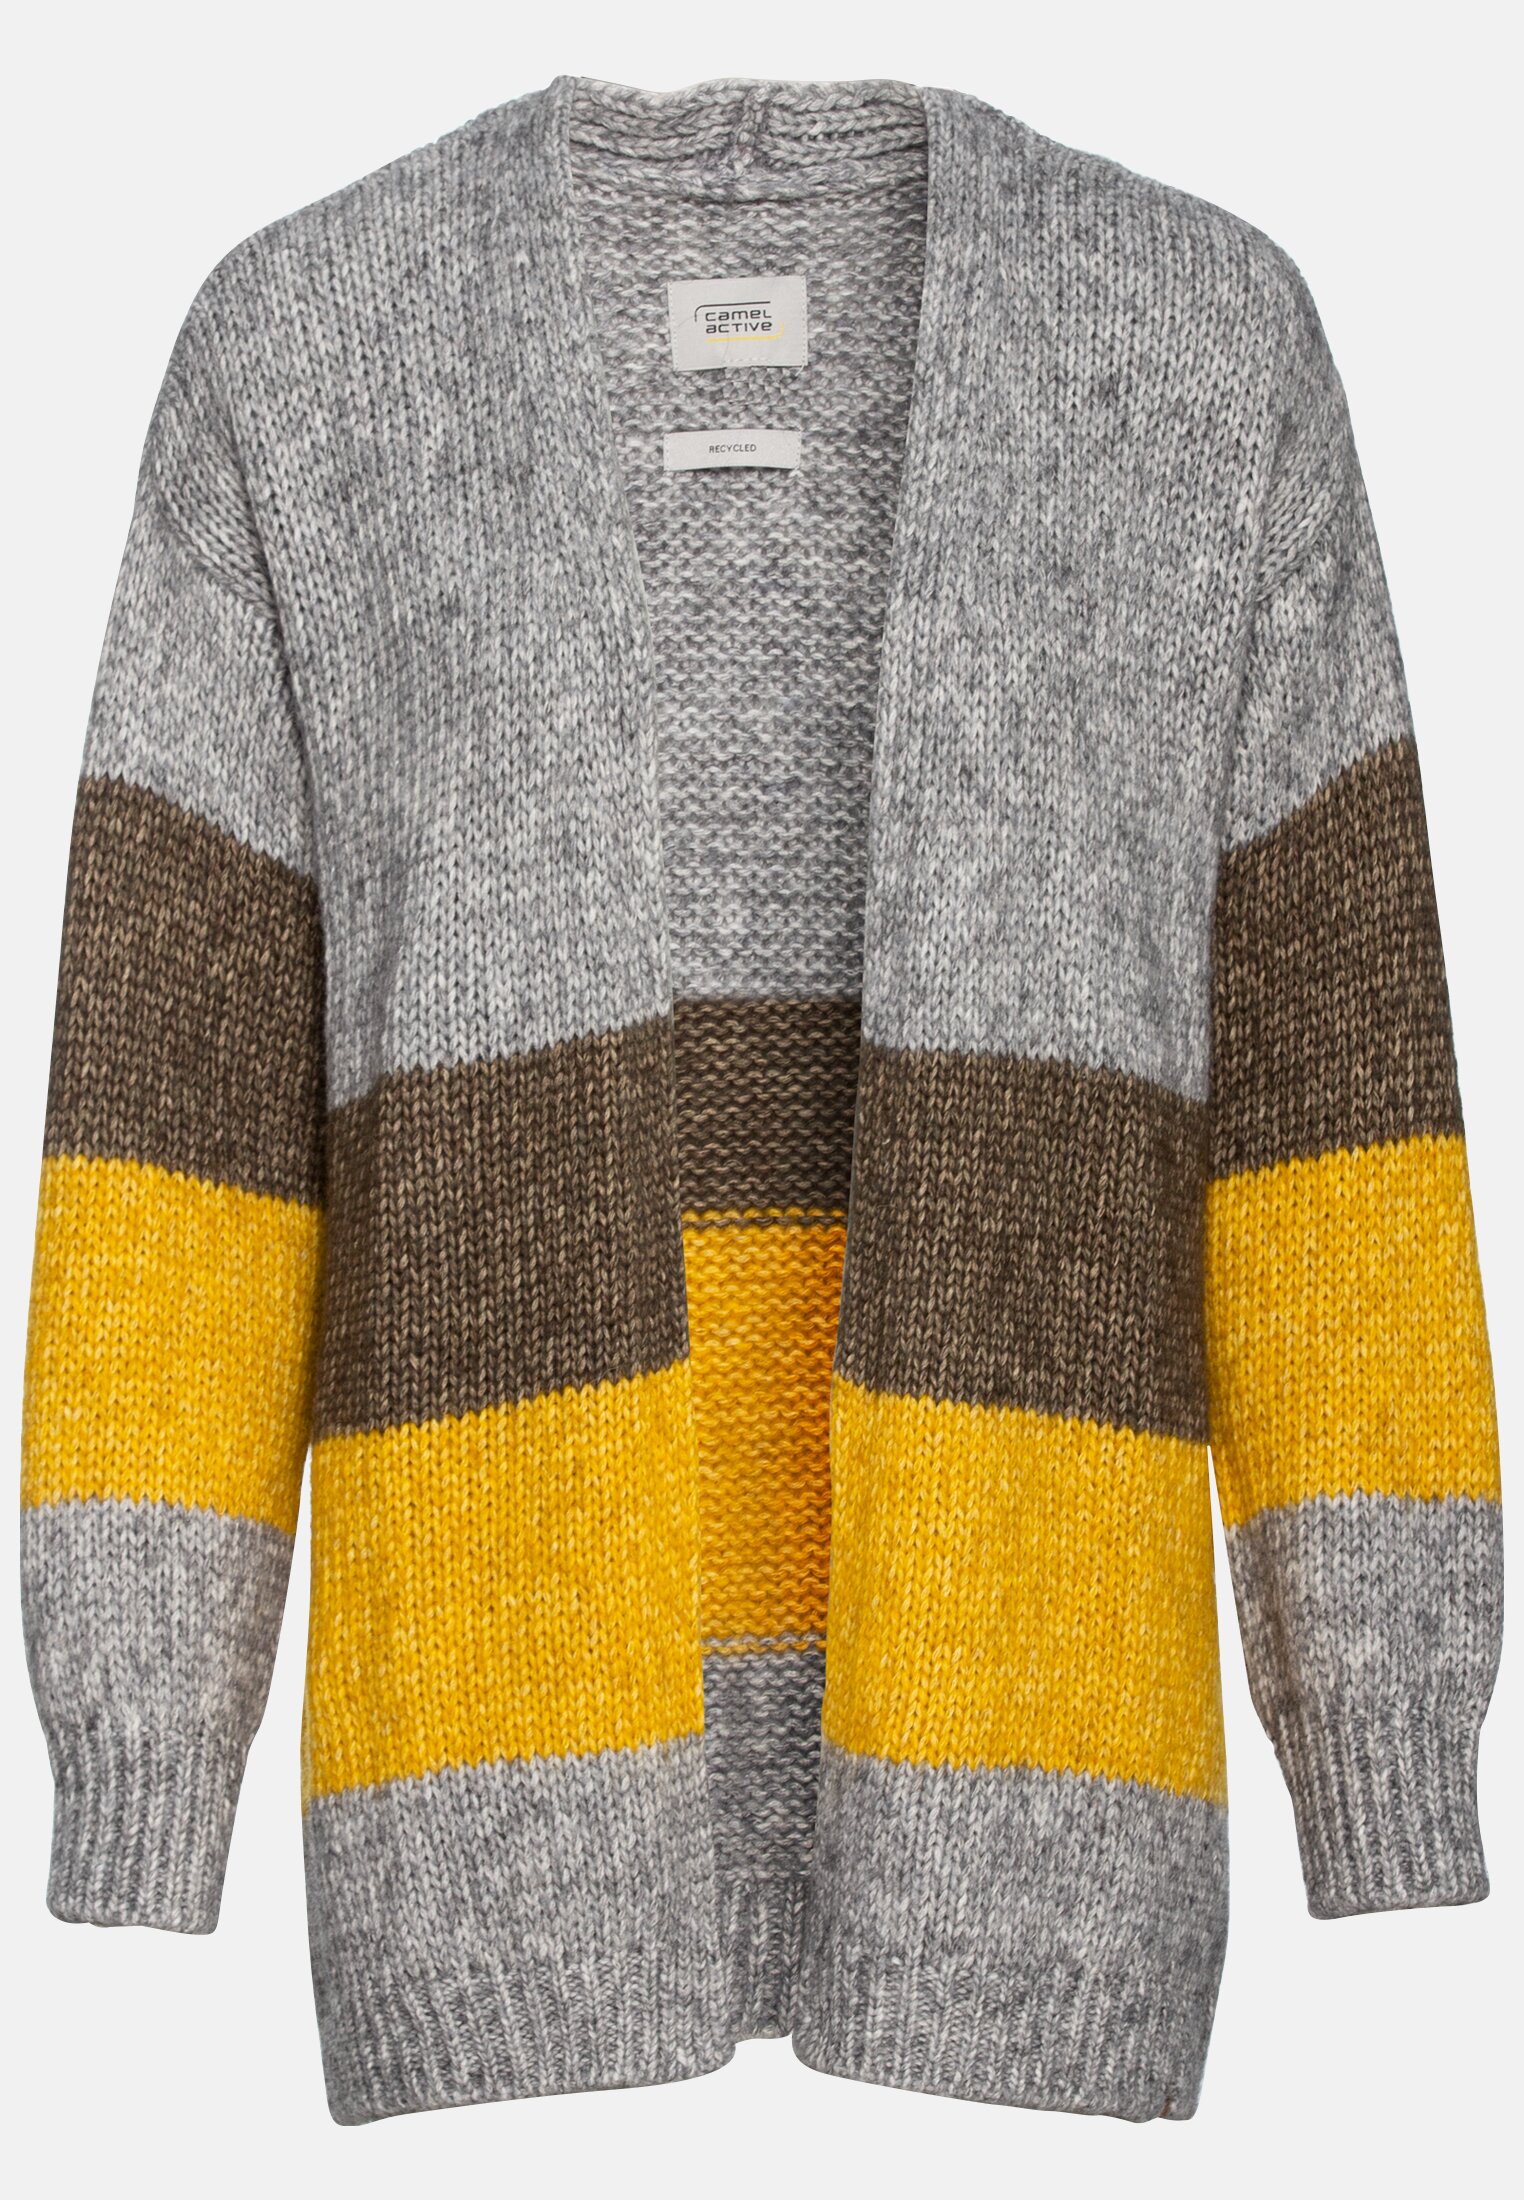 Camel Active Knitted cardigan in recycled material mix